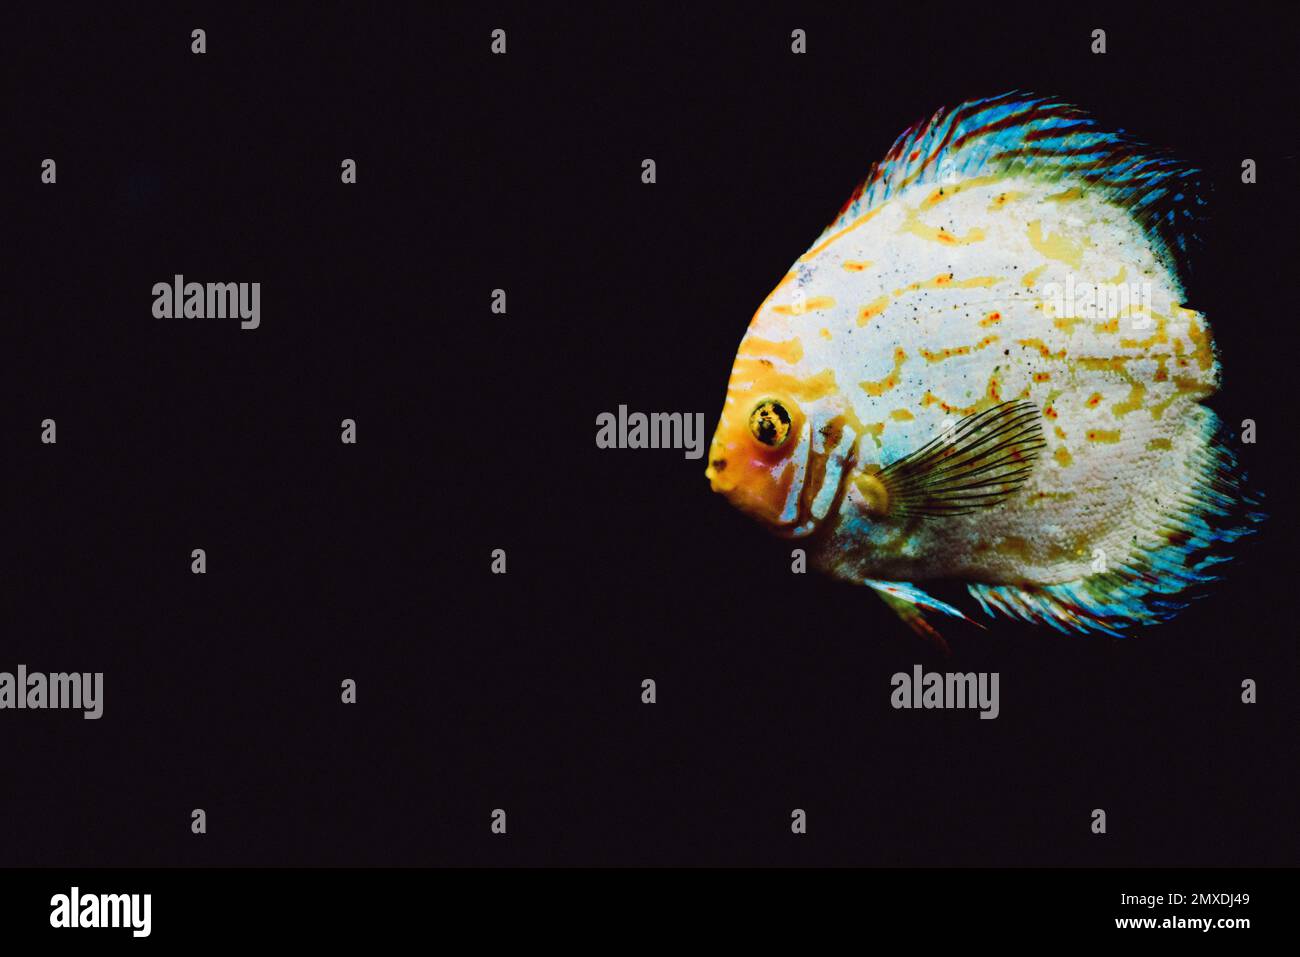 A closeup shot of a Heckel discus fish isolated on dark background Stock Photo